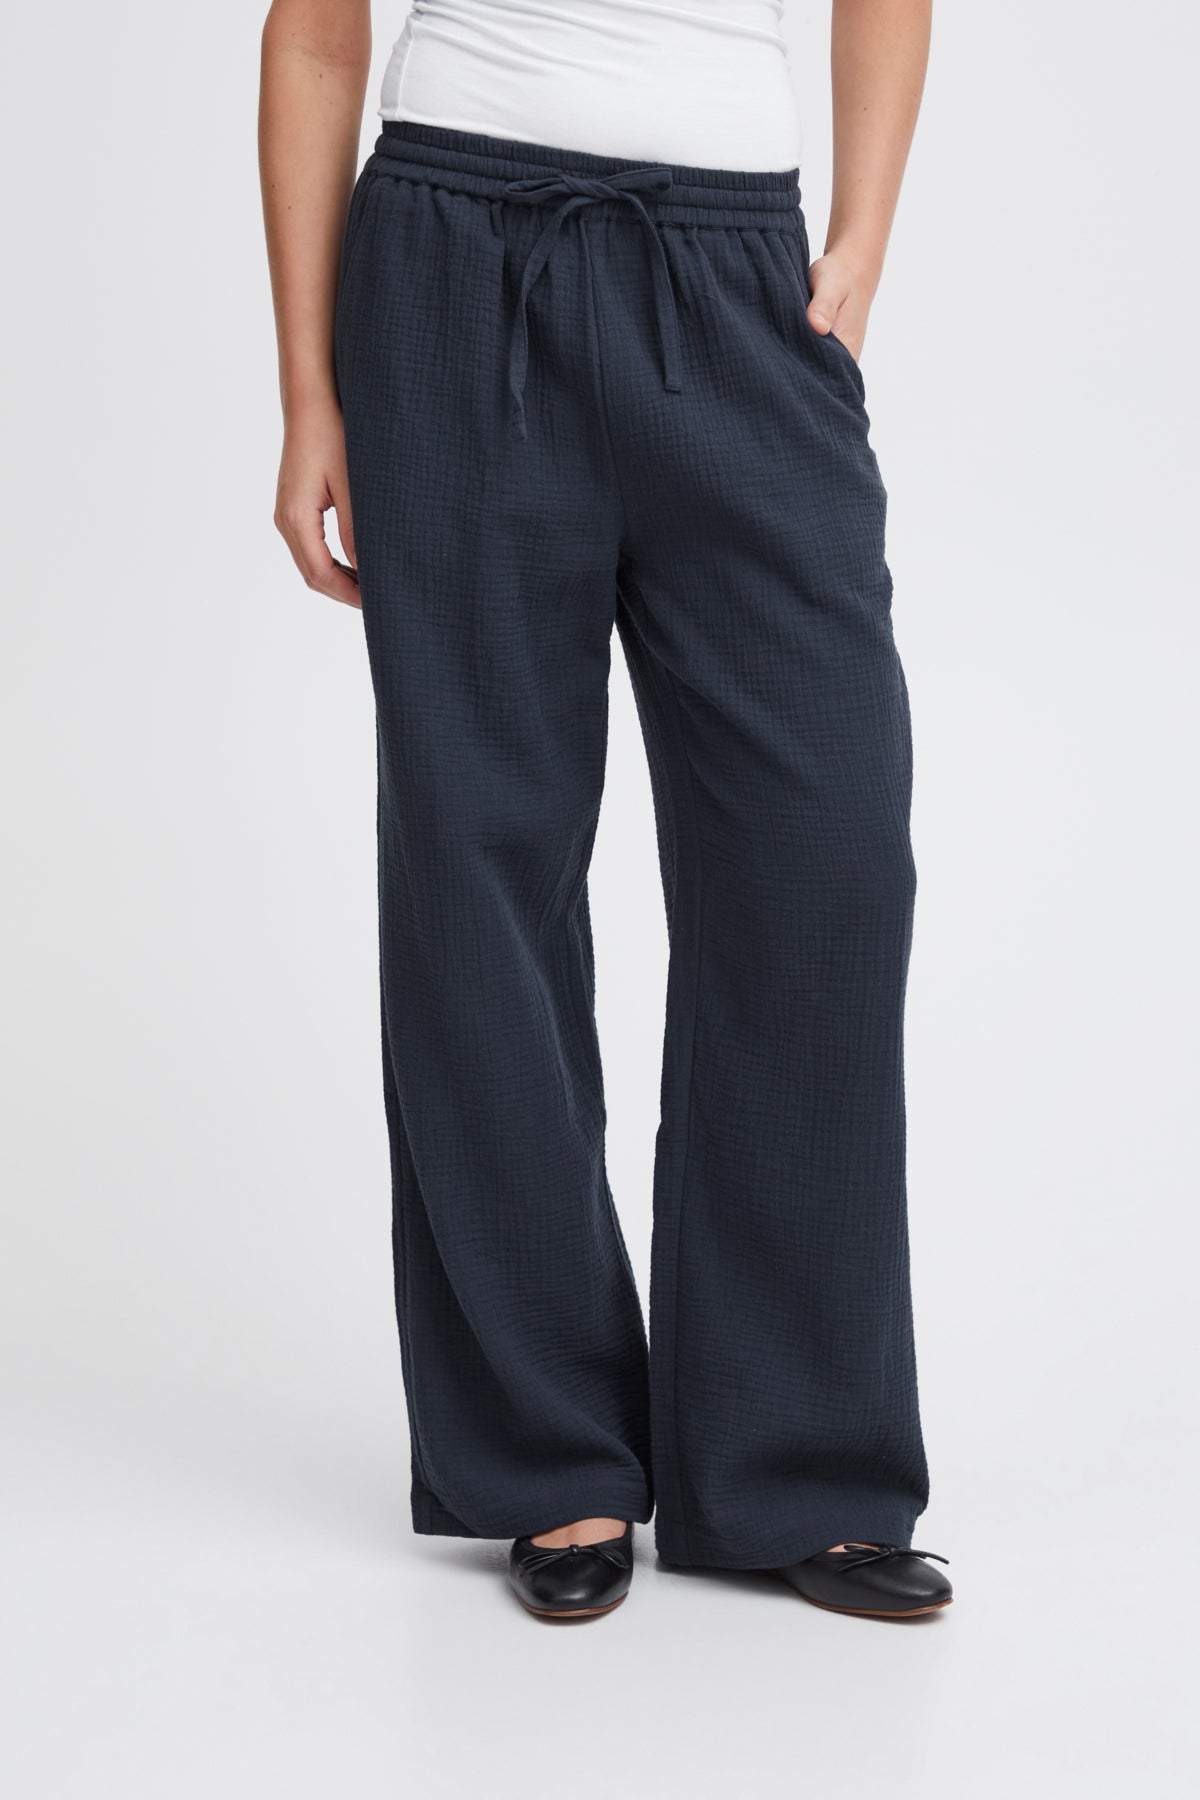 Mika Trouser in Total Eclipse